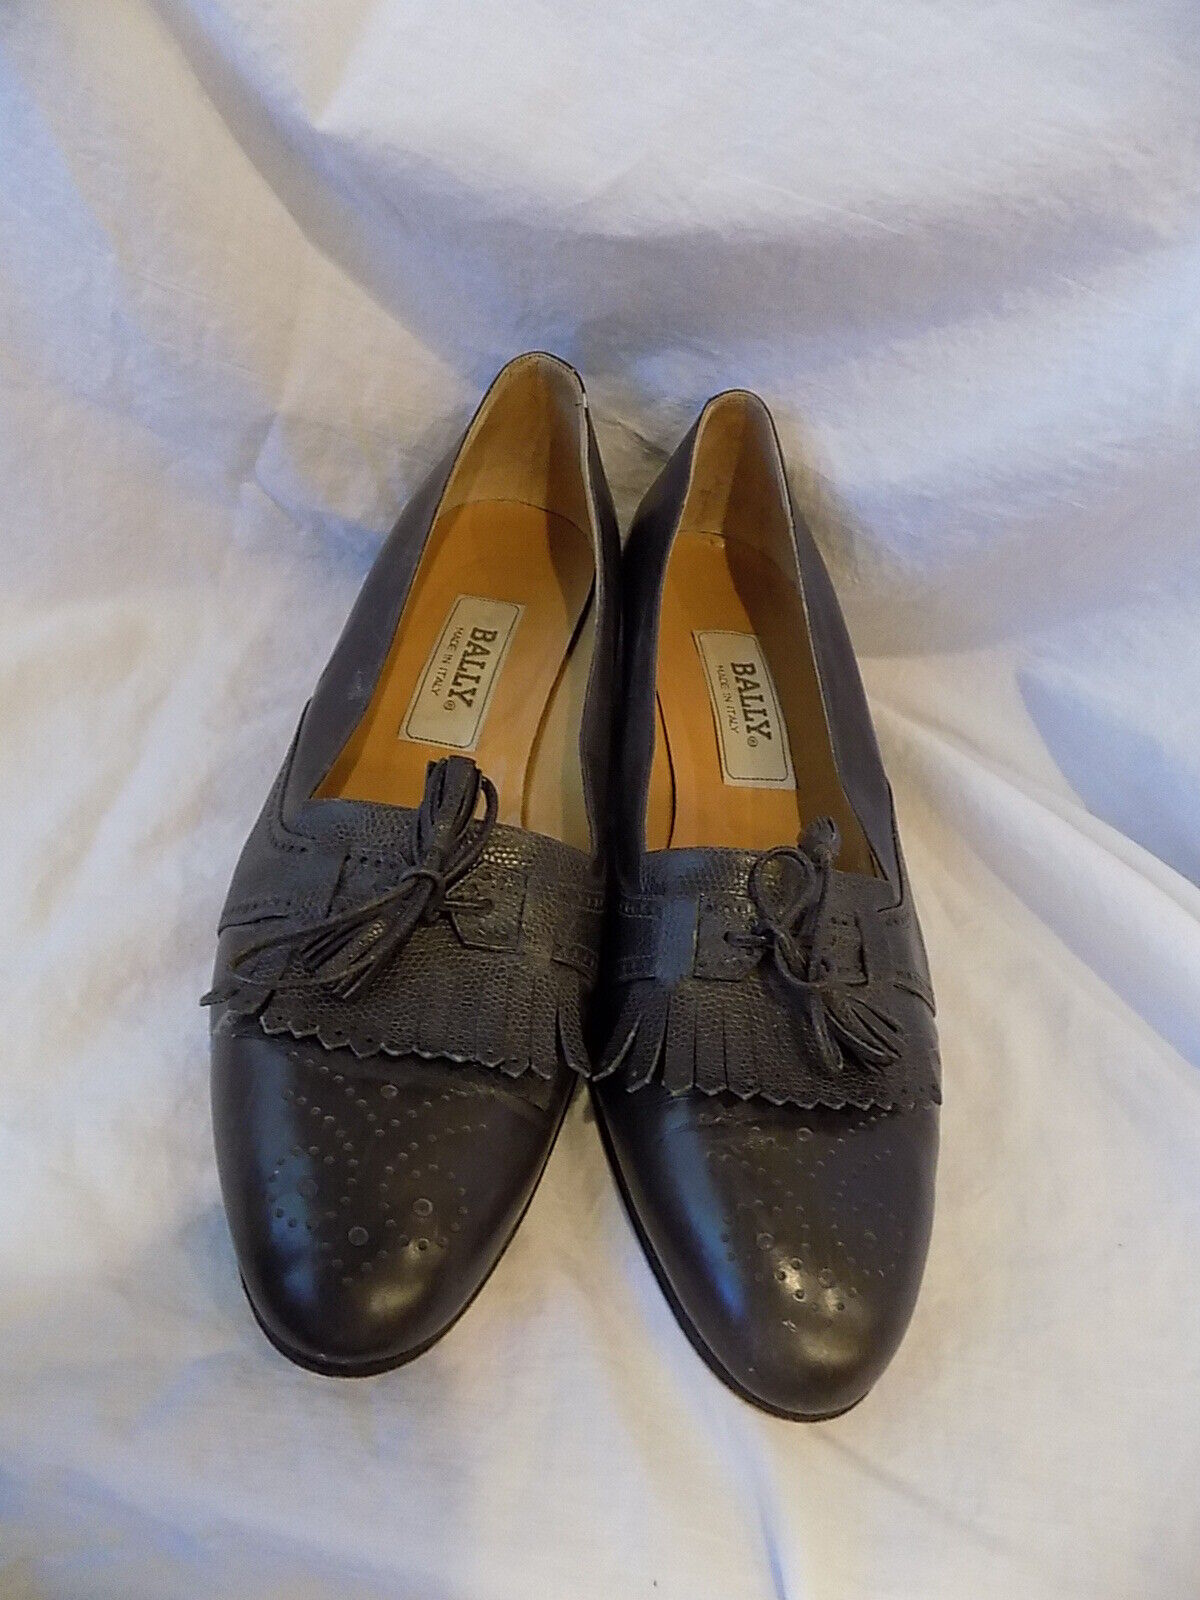 BALLY Gray Leather Loafer Style Heels Womens Size 10M Vero Cuoio Italy (250)